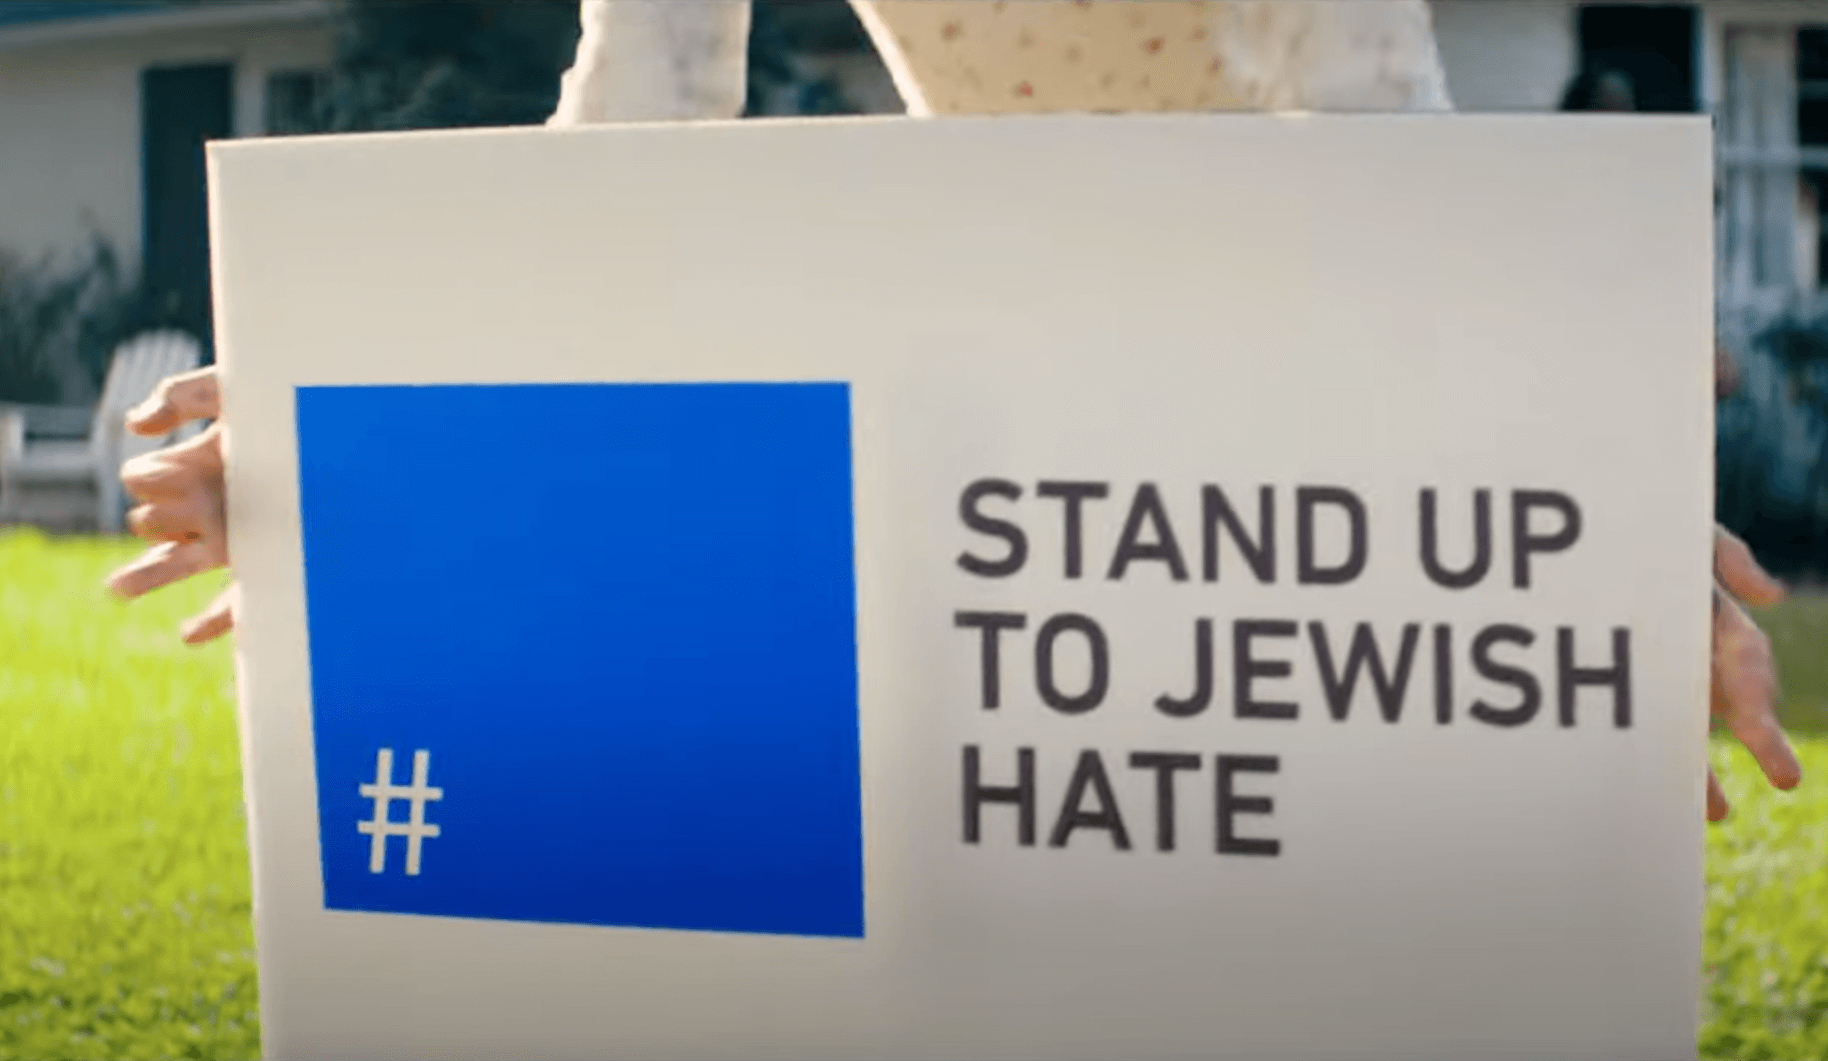 A woman places a lawn sign with the slogan "Stand Up To Jewish Hate" during a scene from a Super Bowl advertisement from the Foundation to Combat Antisemitism.